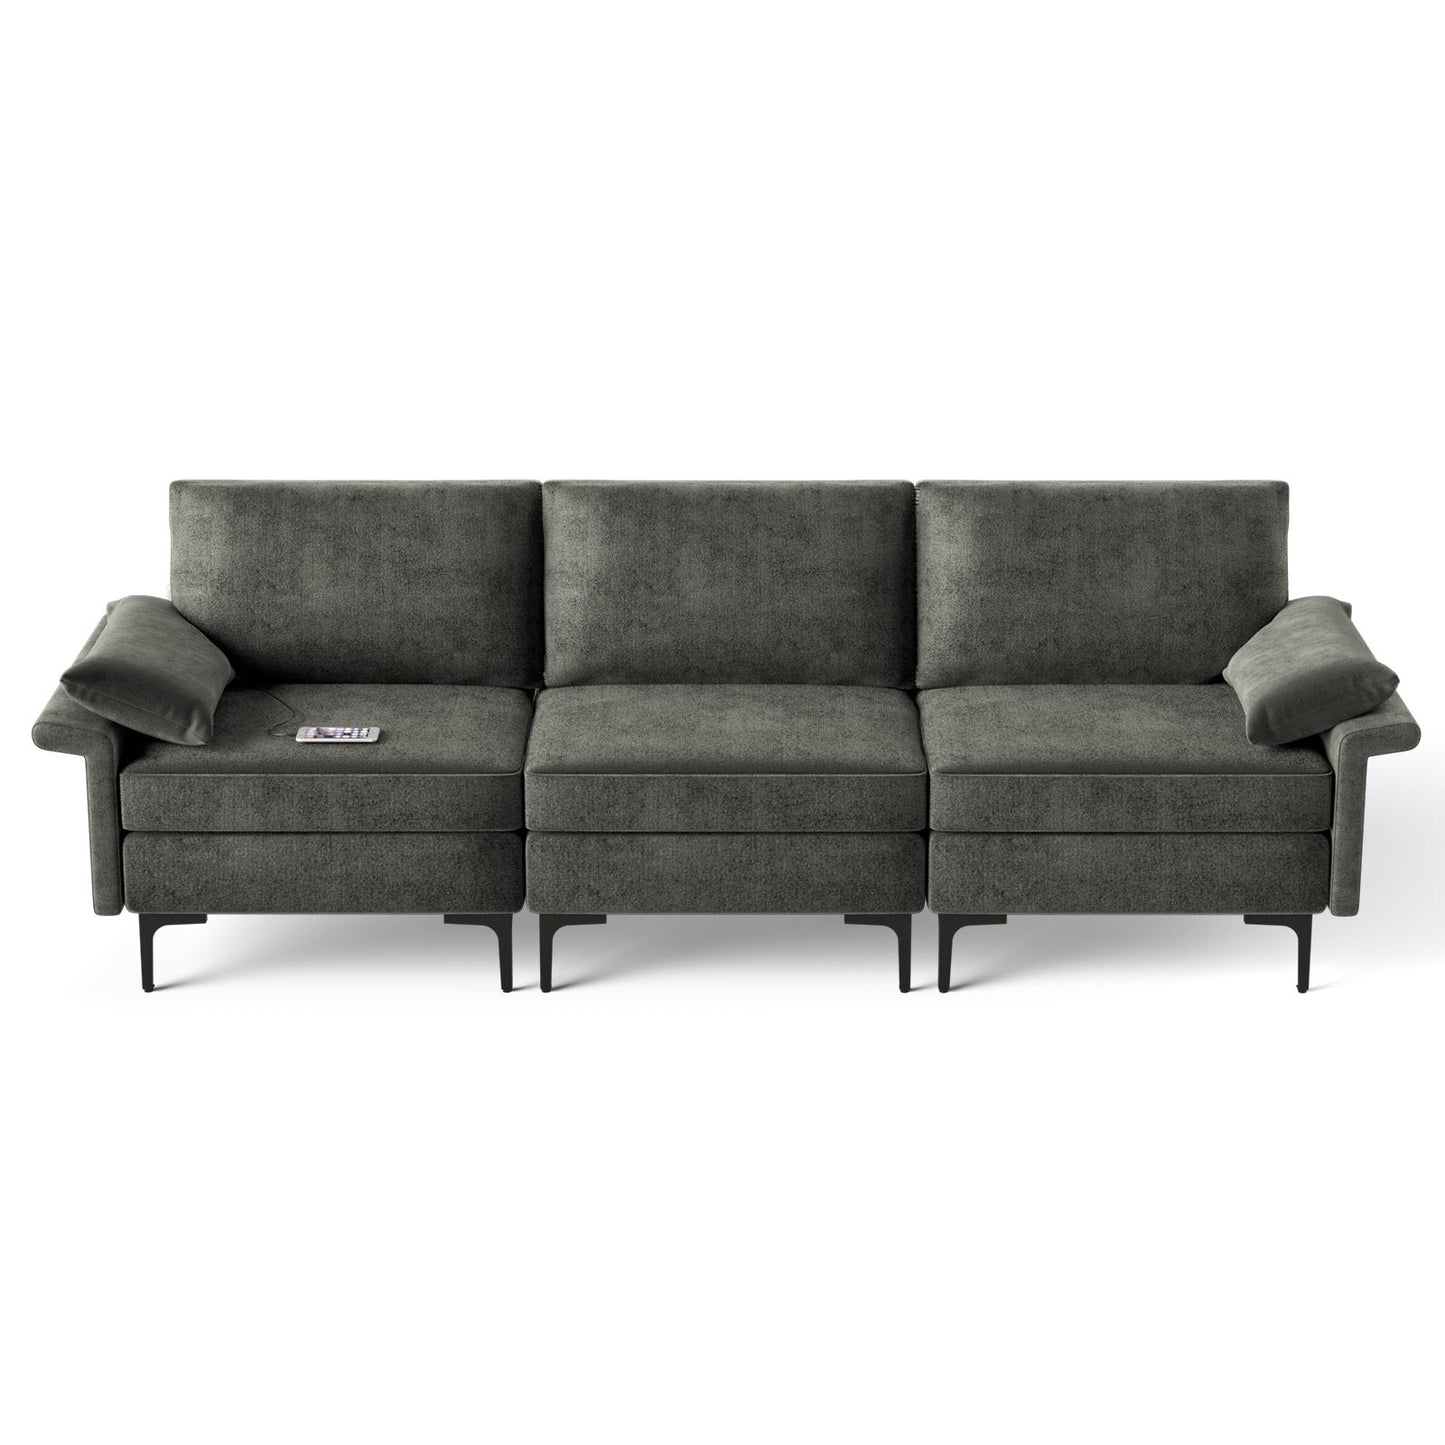 Large 3-Seat Sofa Sectional with Metal Legs and 2 USB Ports for 3-4 people, Gray